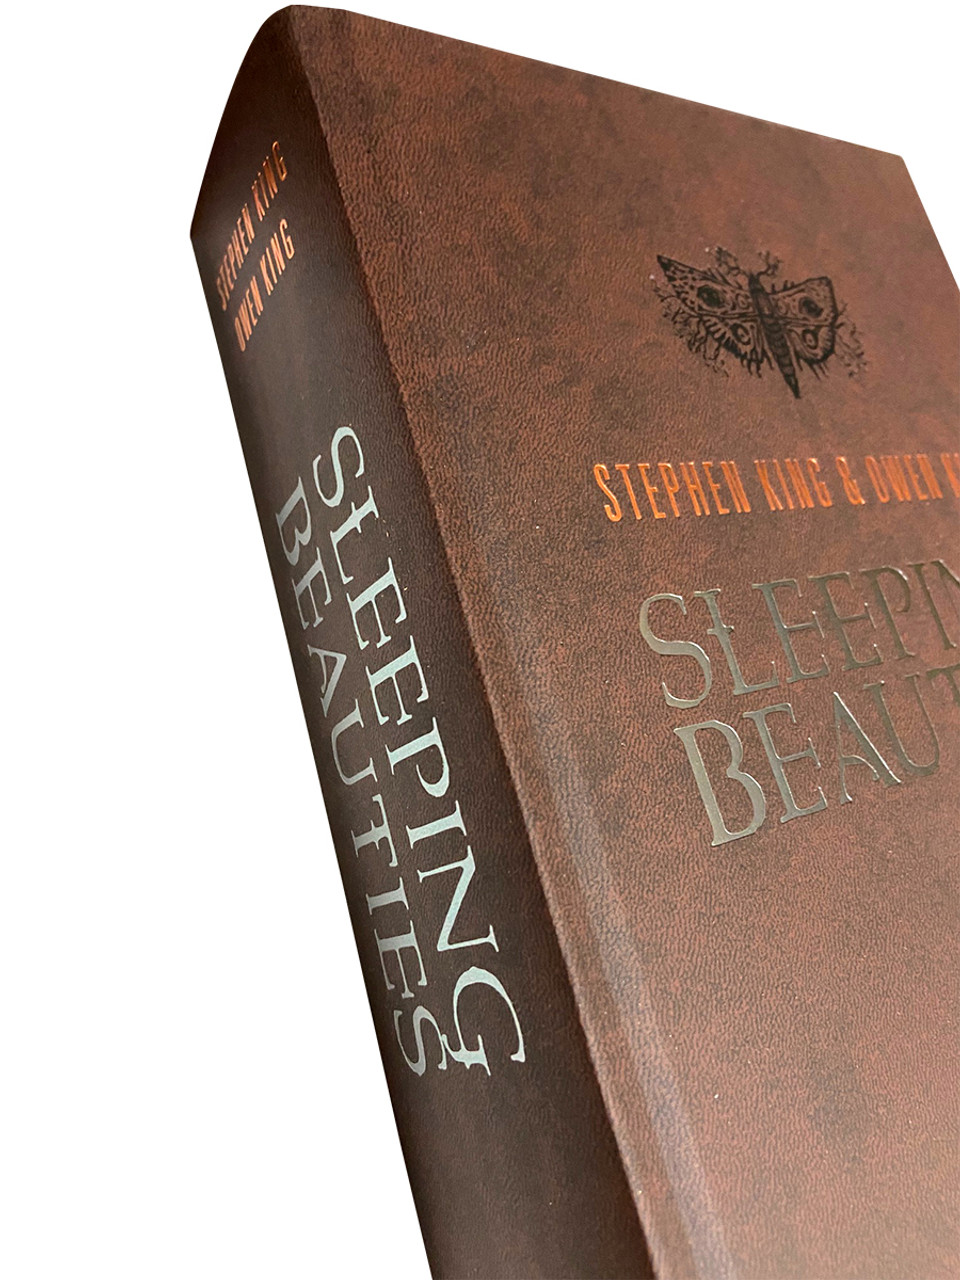 Stephen King and Owen King, "Sleeping Beauties" Signed Limited Edition No. 729 of 850 Tray-cased  [Very Fine]